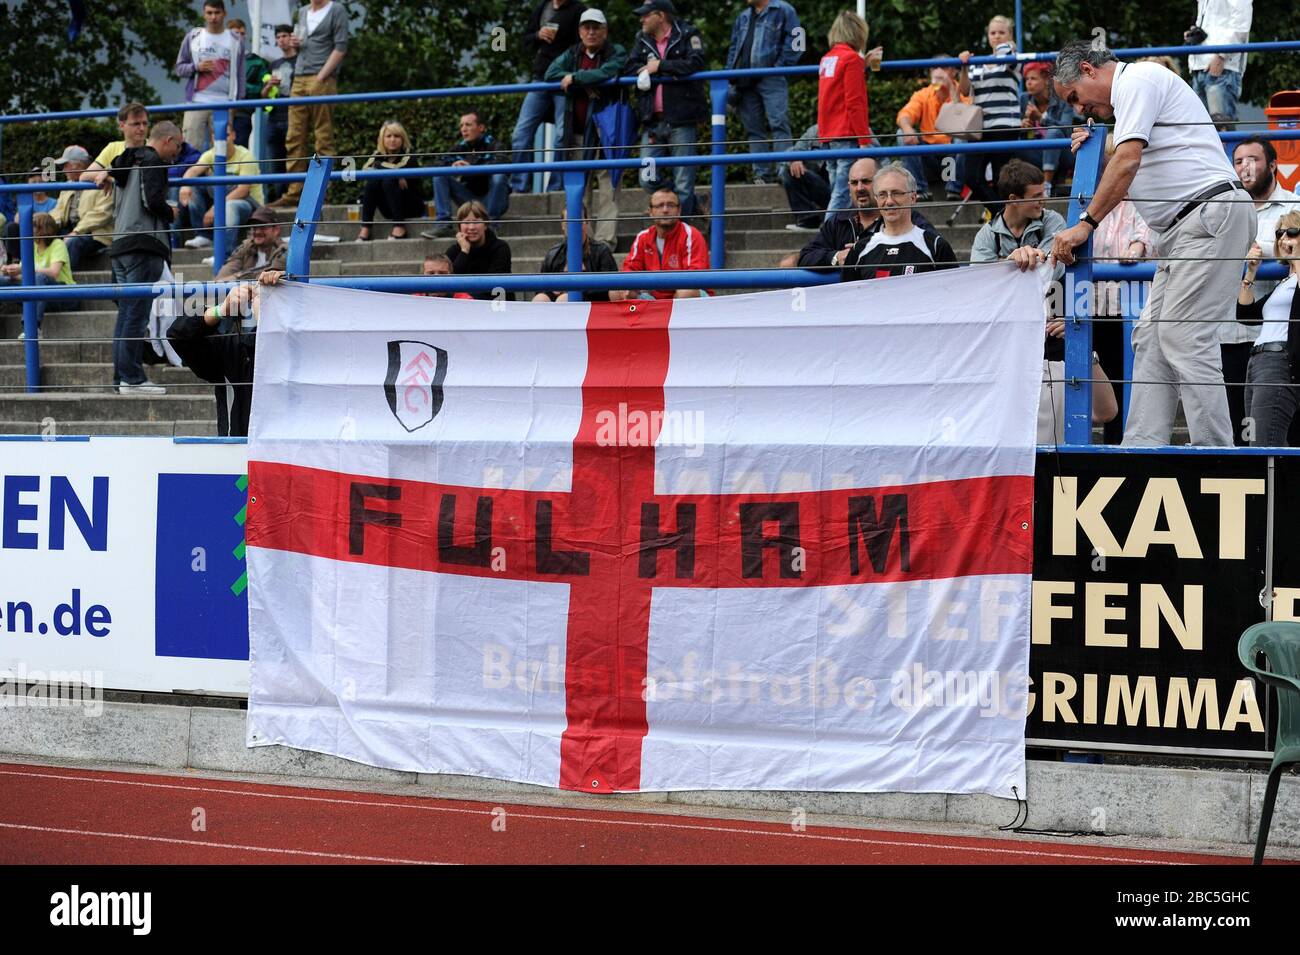 Fulham fans in the stands at the game in Grimma, Germany. Stock Photo